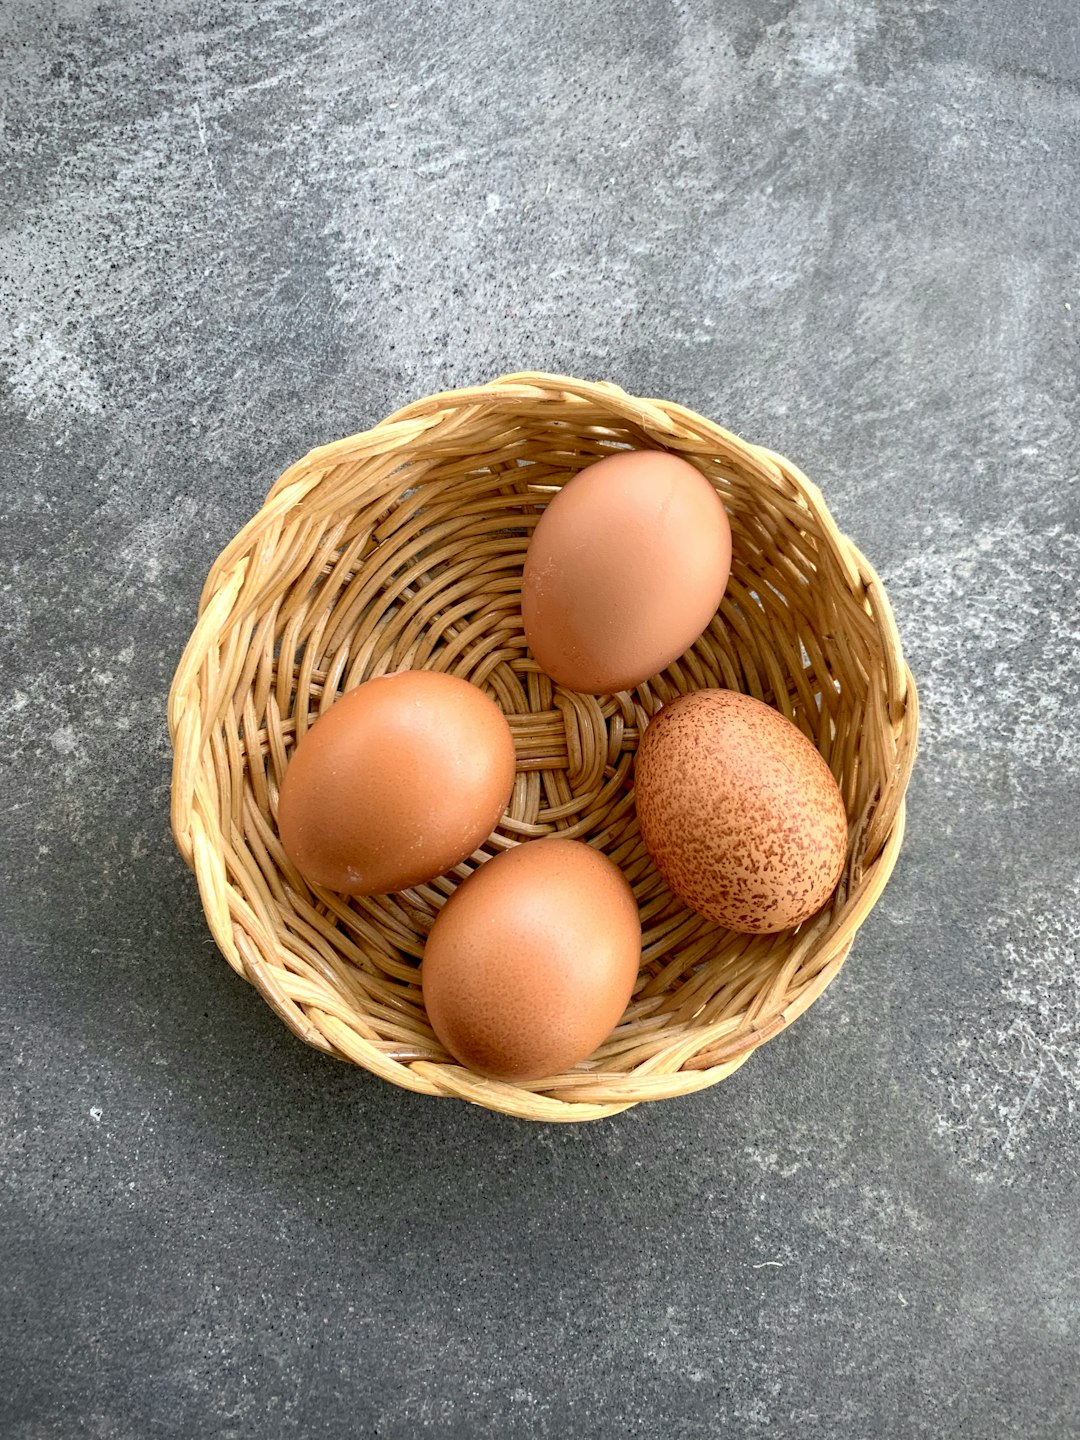 How To Make Eggs in a Basket